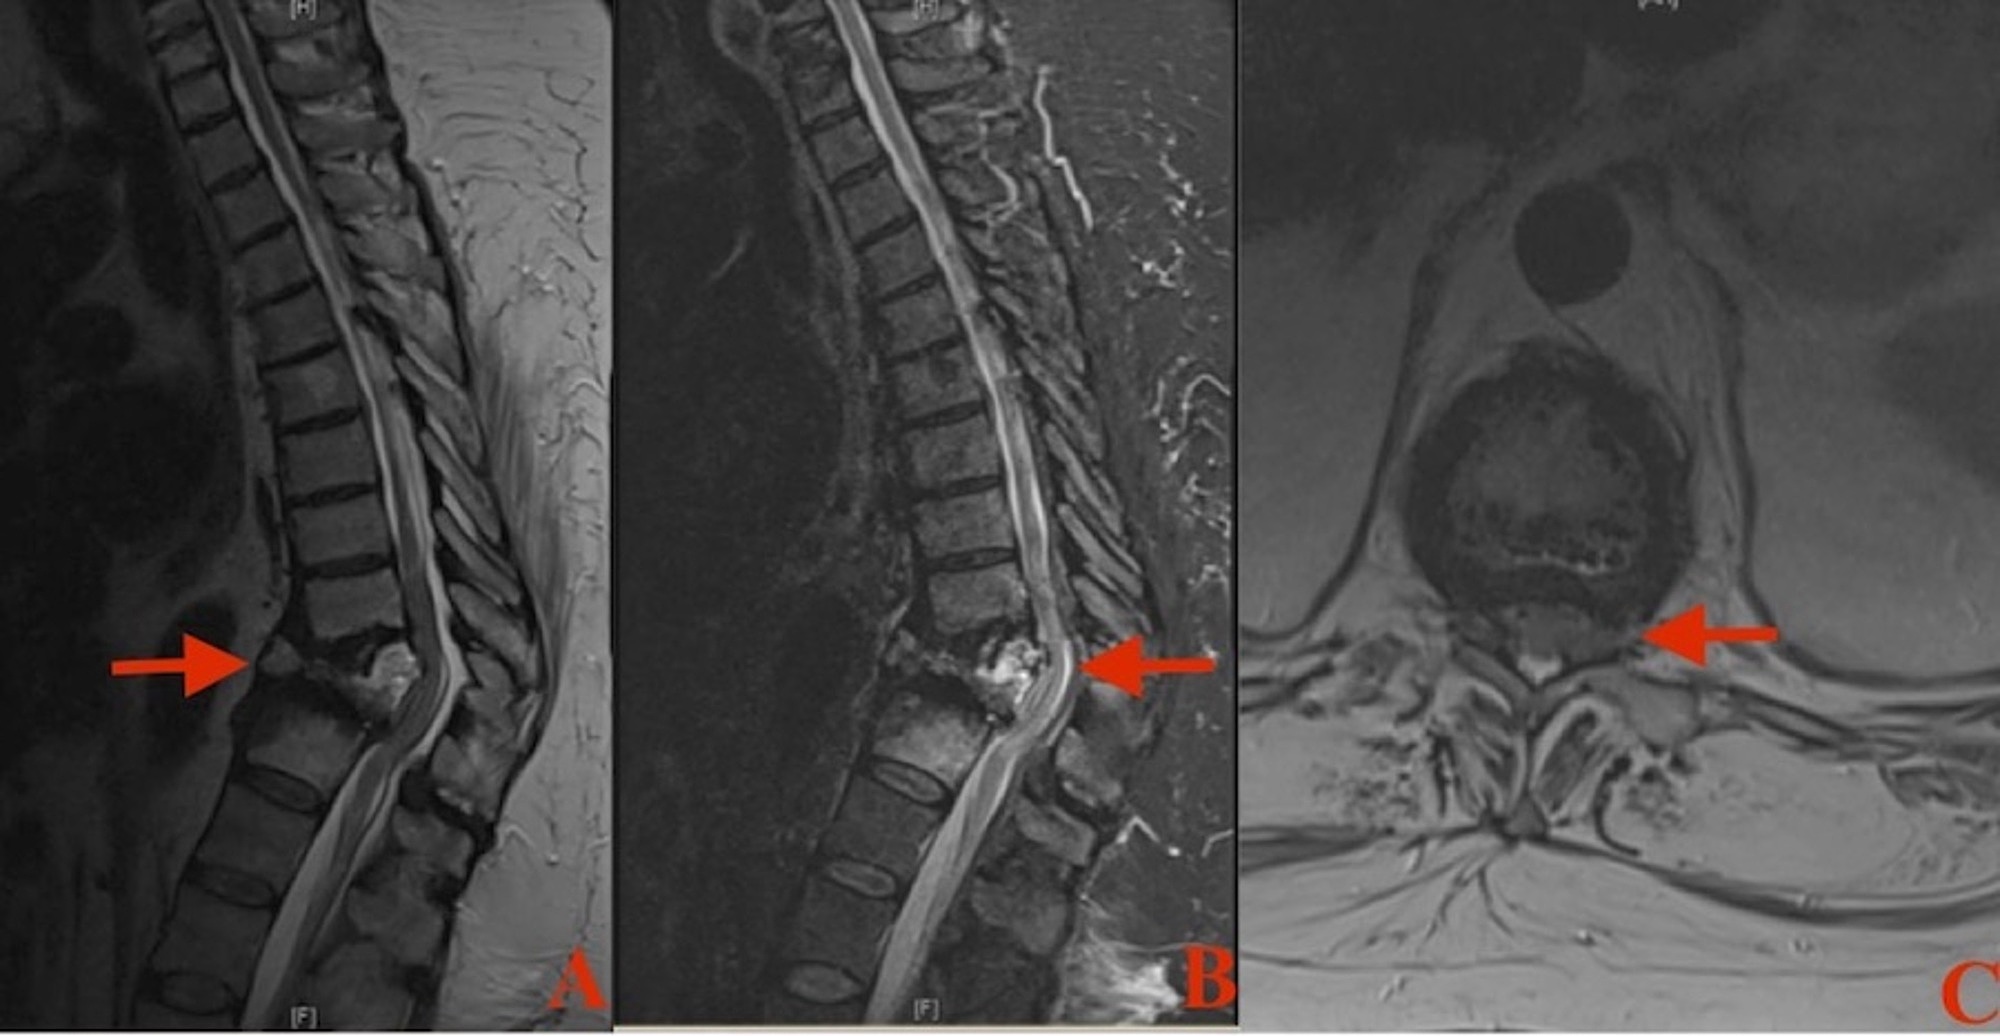 Cureus Duplication Of Vertebral Pedicles Associated With A Thoracic Burst Fracture Resulting In Spinal Cord Compression A Case Report